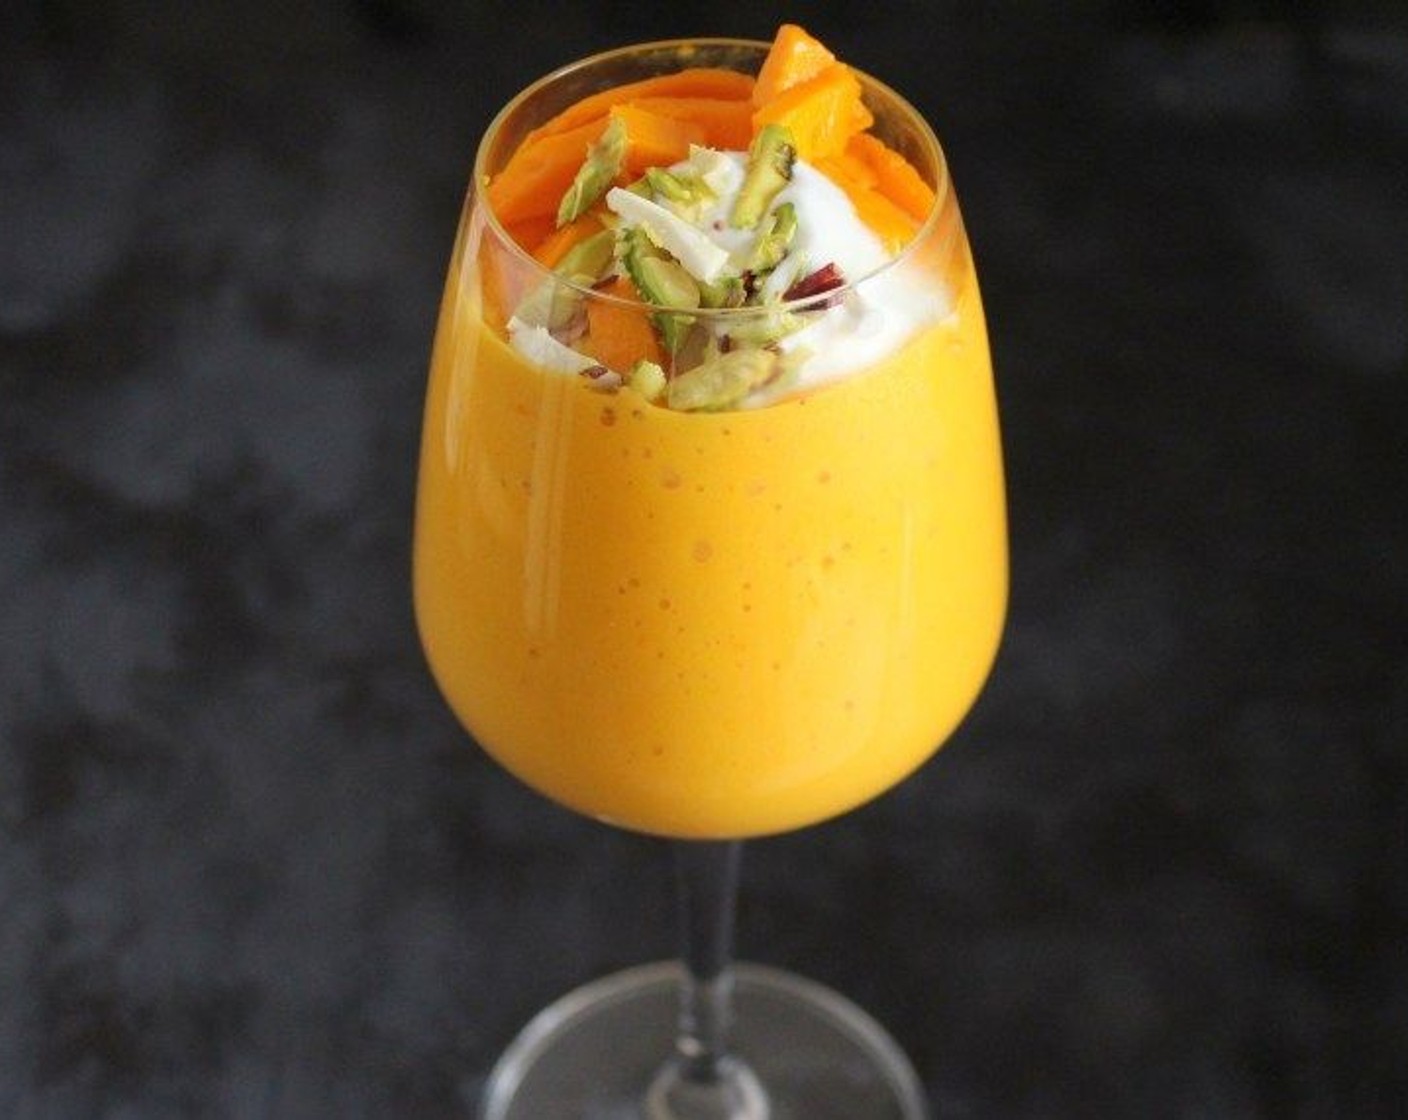 step 3 Pour it in a glass and garnish it with vanilla or mango ice cream, or some chopped fruit. Serve chilled. Enjoy!